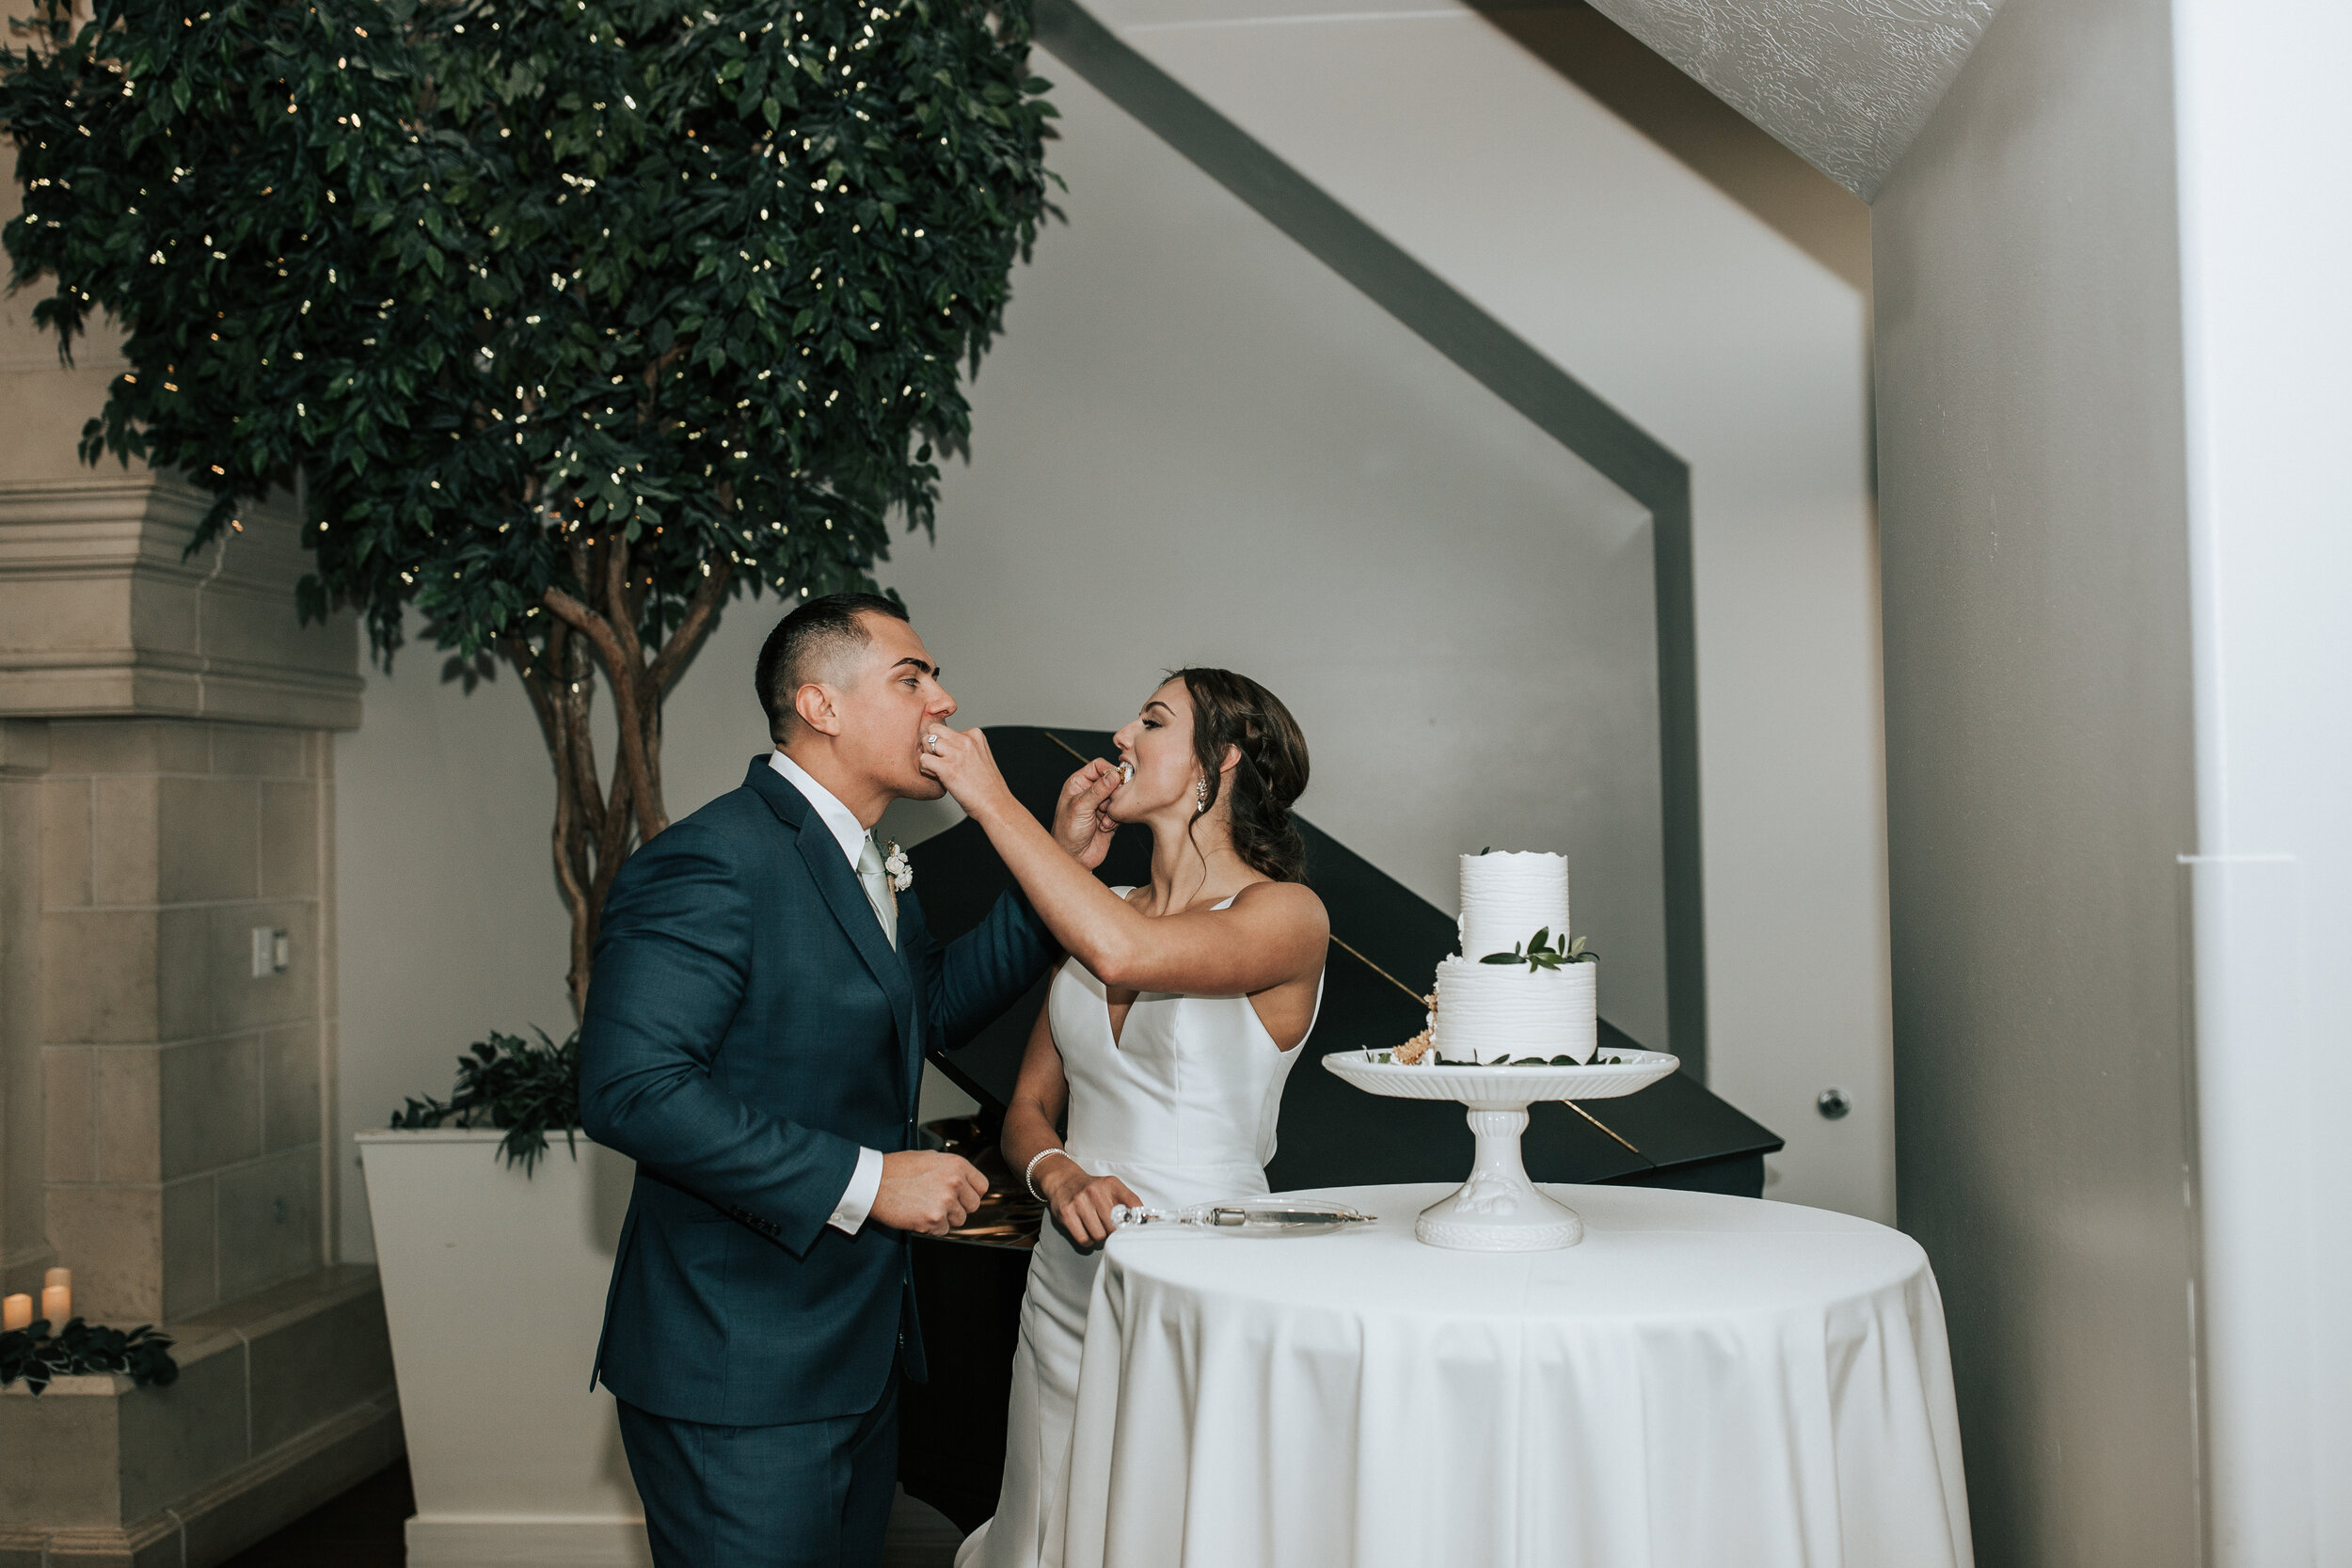  Bride and groom feeding each other wedding cake at Sleepy Ridge Golf Course in Utah County captured by Emily Jenkins Photography. classy cake eating feeding the wedding cake sleek modern wedding dress #emilyjenkinsphotography #emilyjenkinsweddings #